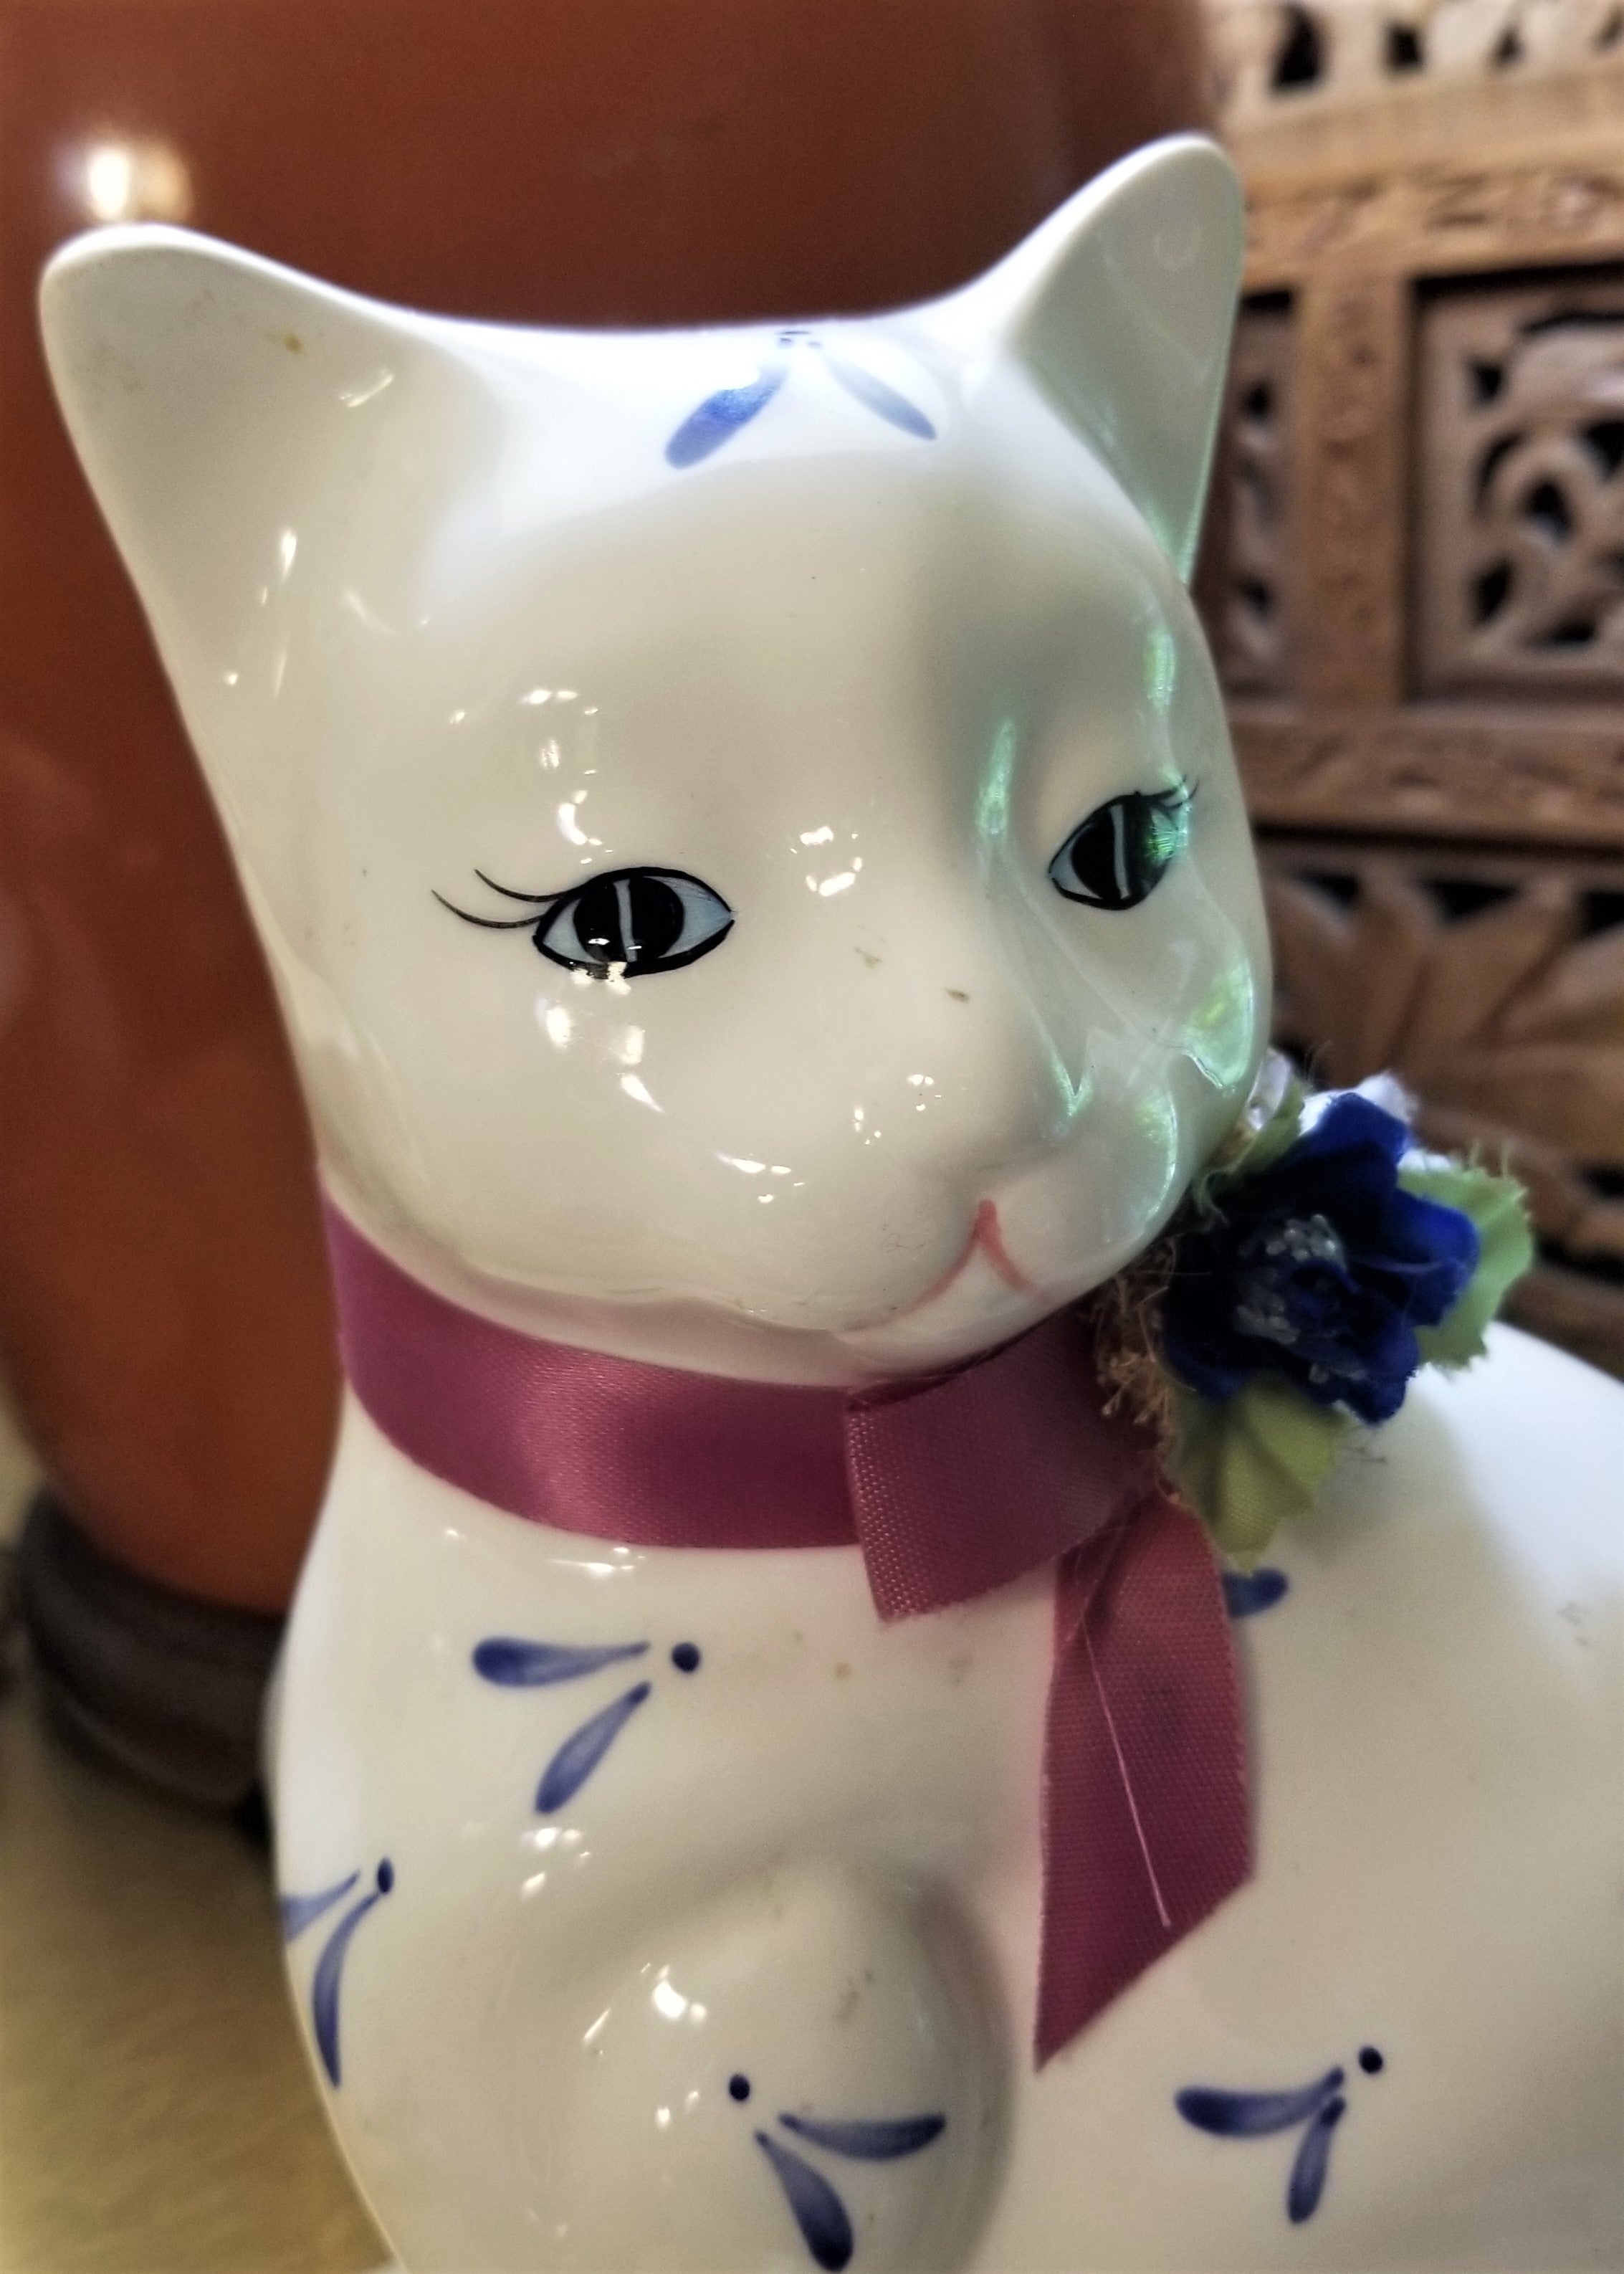 Vintage Tall White cat Figurine Hand-painted